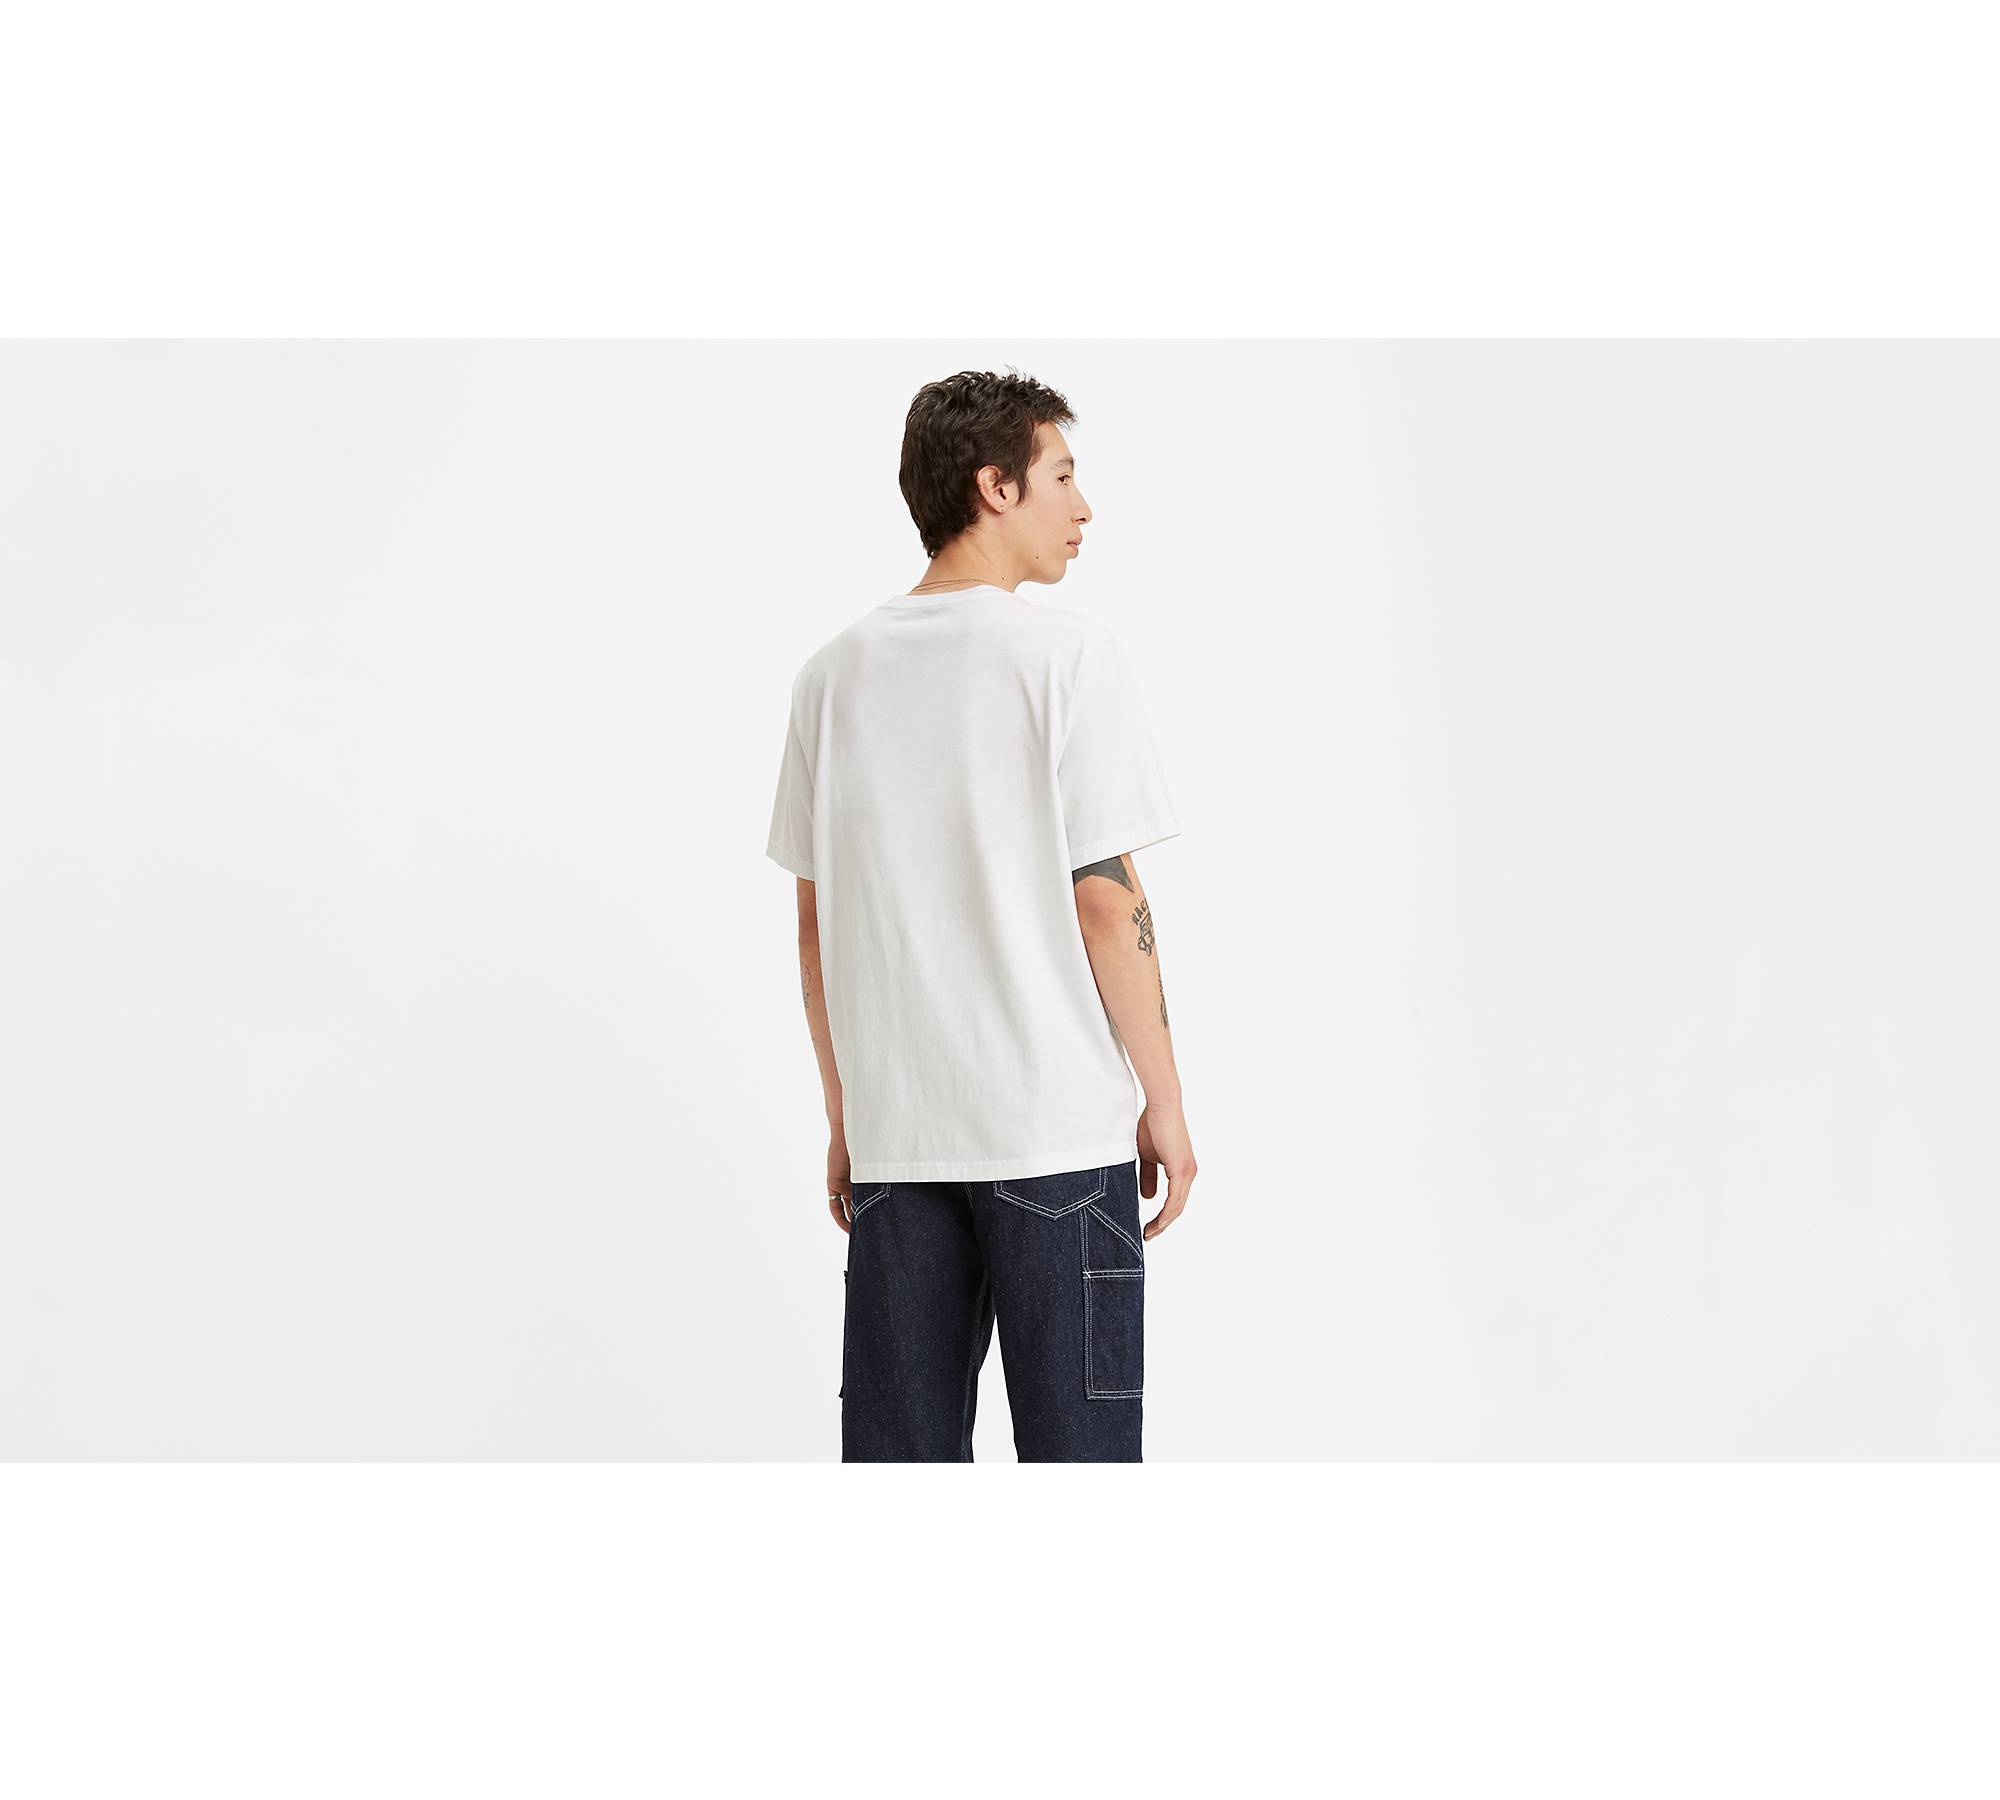 Levi's® X Vote Relaxed Fit Tee Shirt - Multi-color | Levi's® US